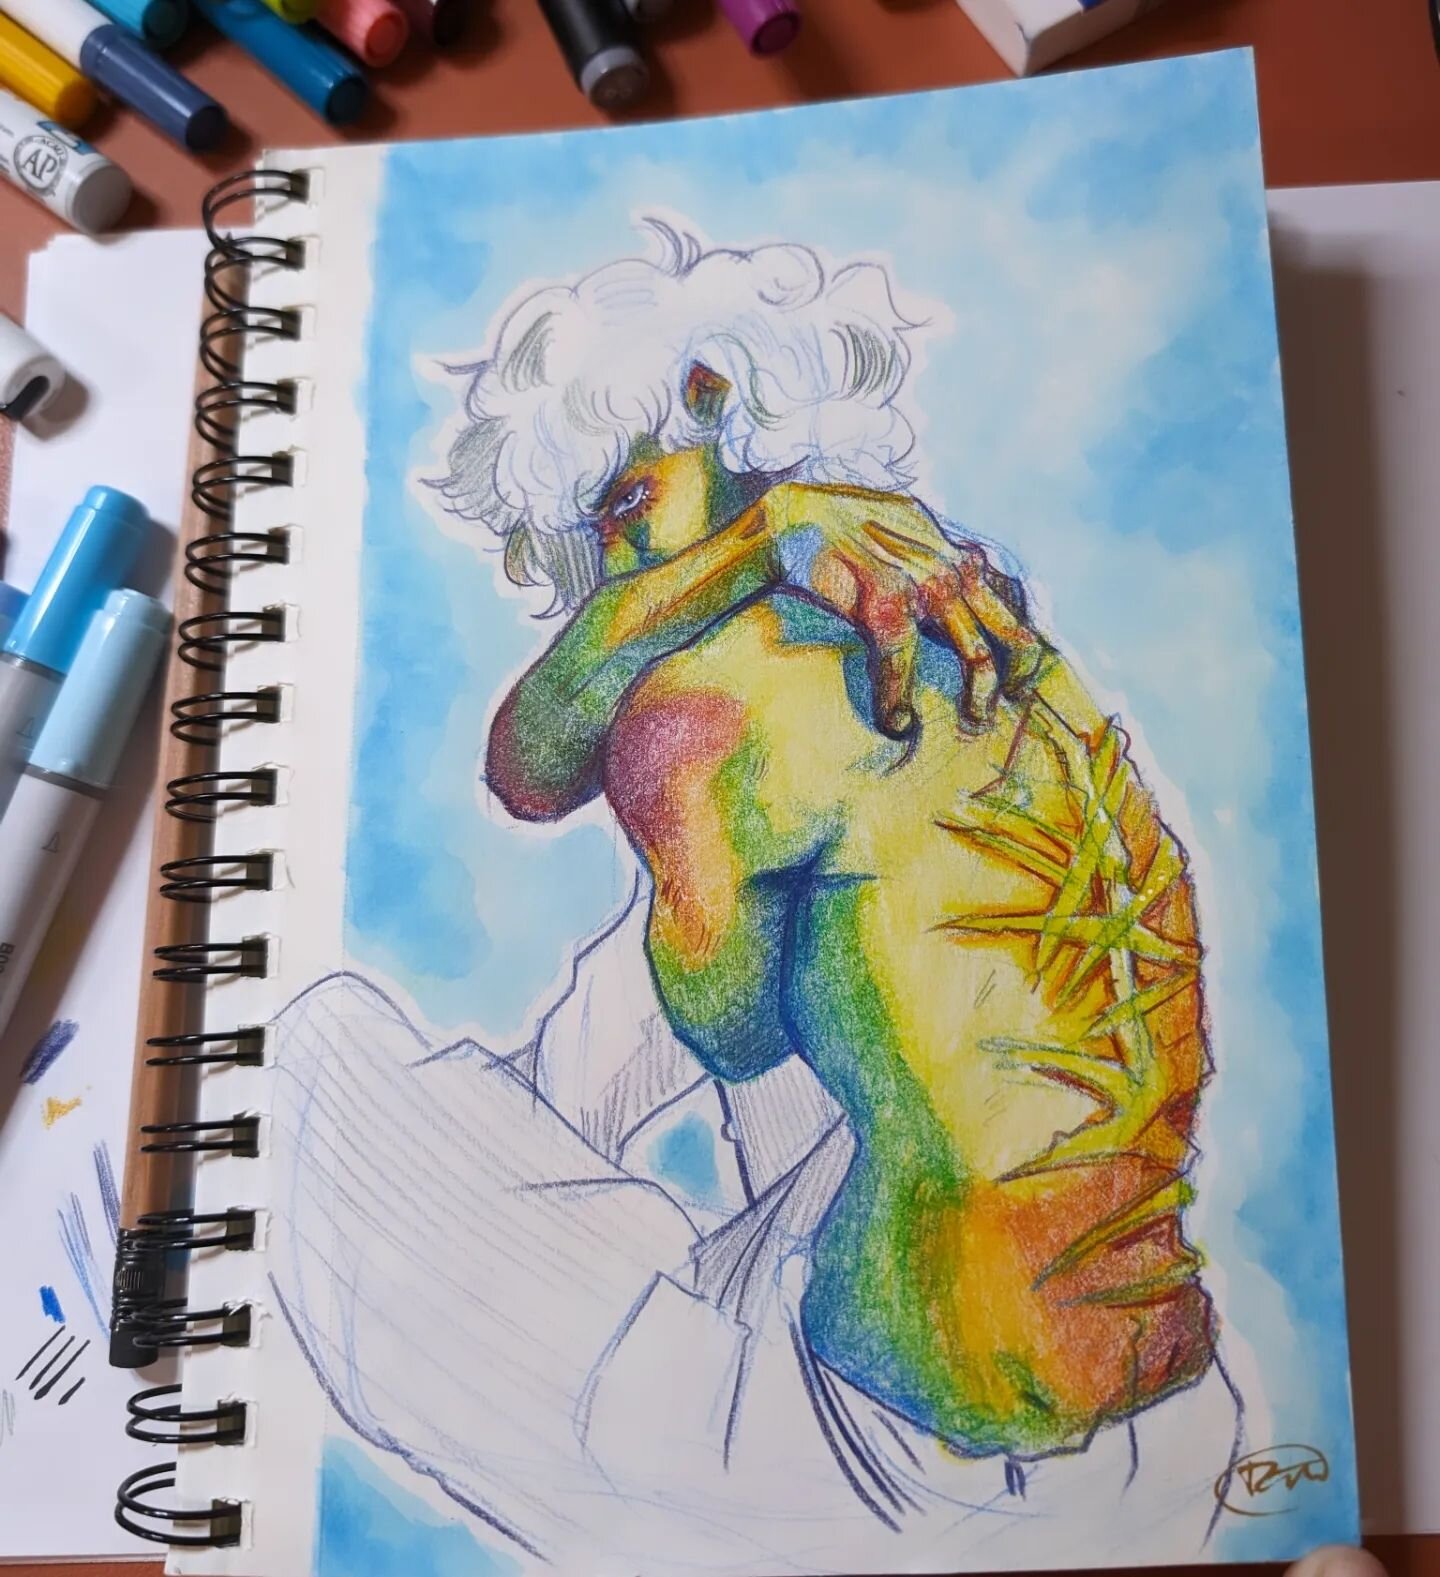 My husband called this my Fallen Prince Archetype lol #colorpencil #copicmarkers #traditionalart